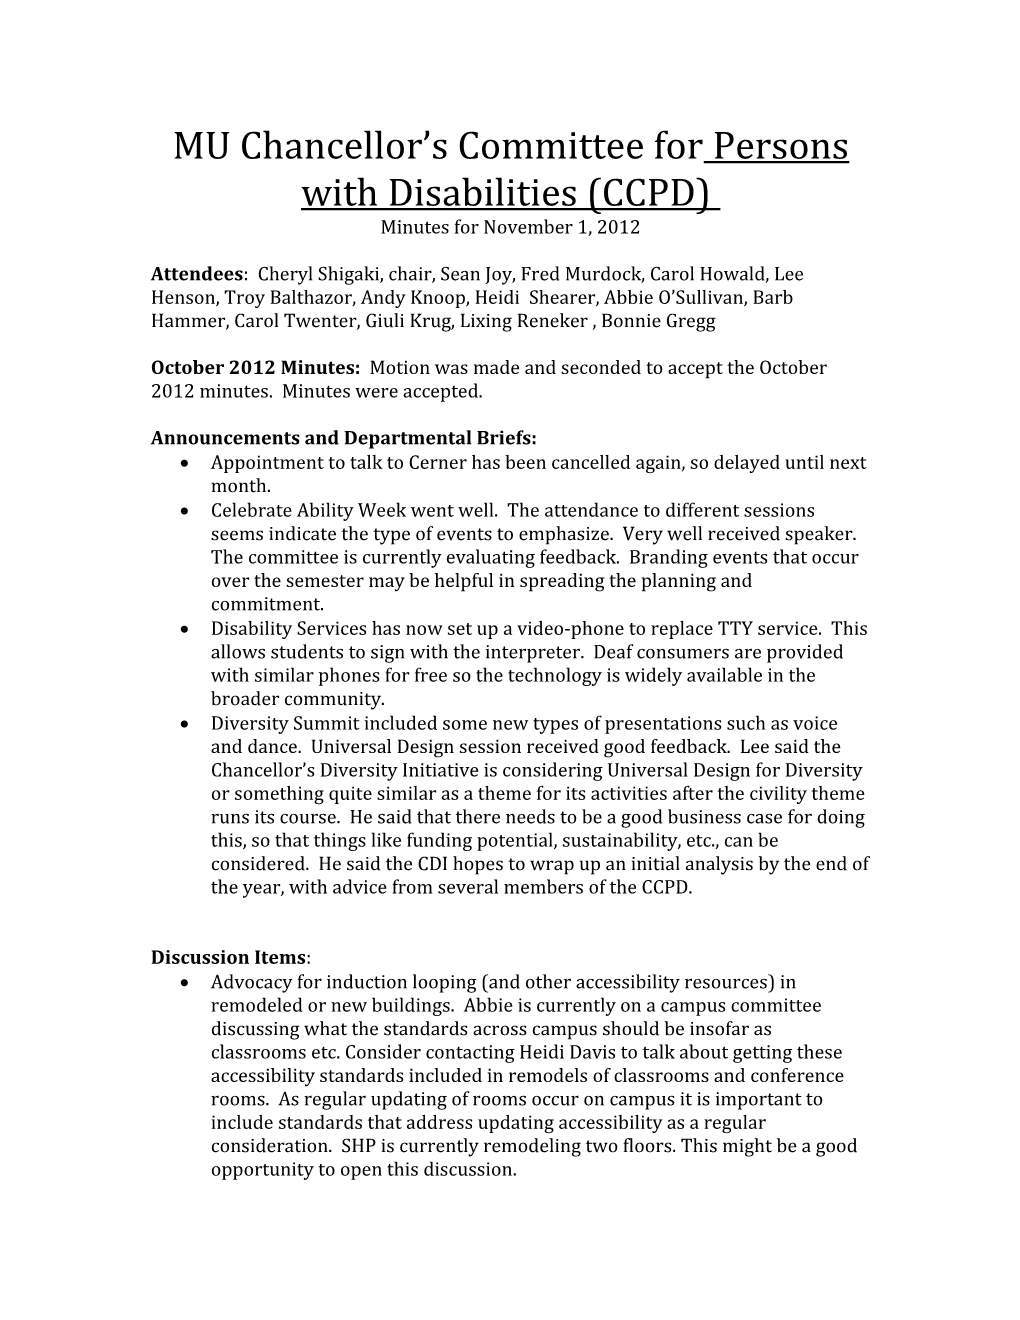 MU Chancellor S Committee for Persons with Disabilities (CCPD)